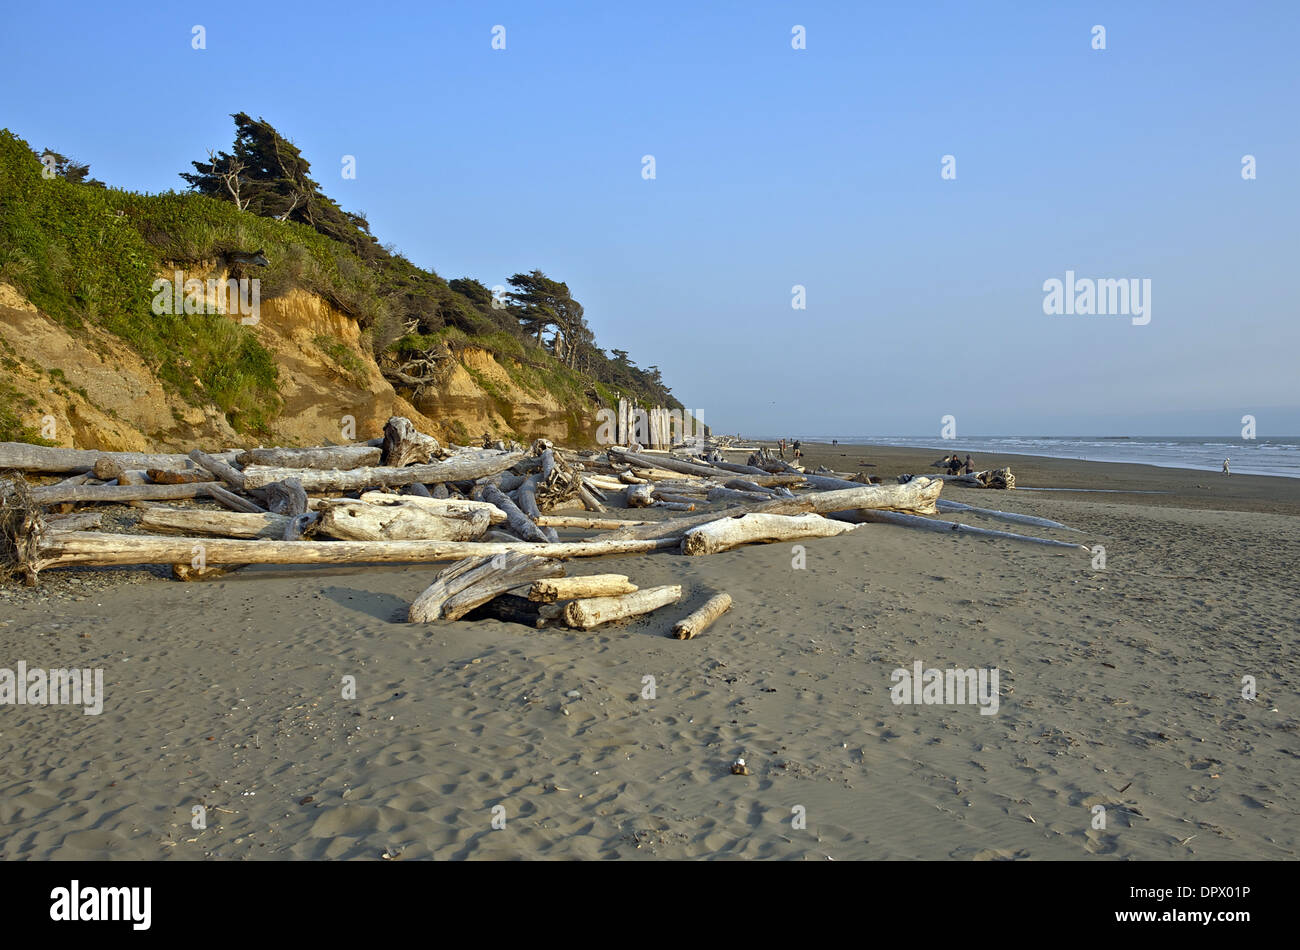 North California Beach Landscape. Pacific Ocean Sandy Shore with Wood Logs. California Photos Collection. Stock Photo